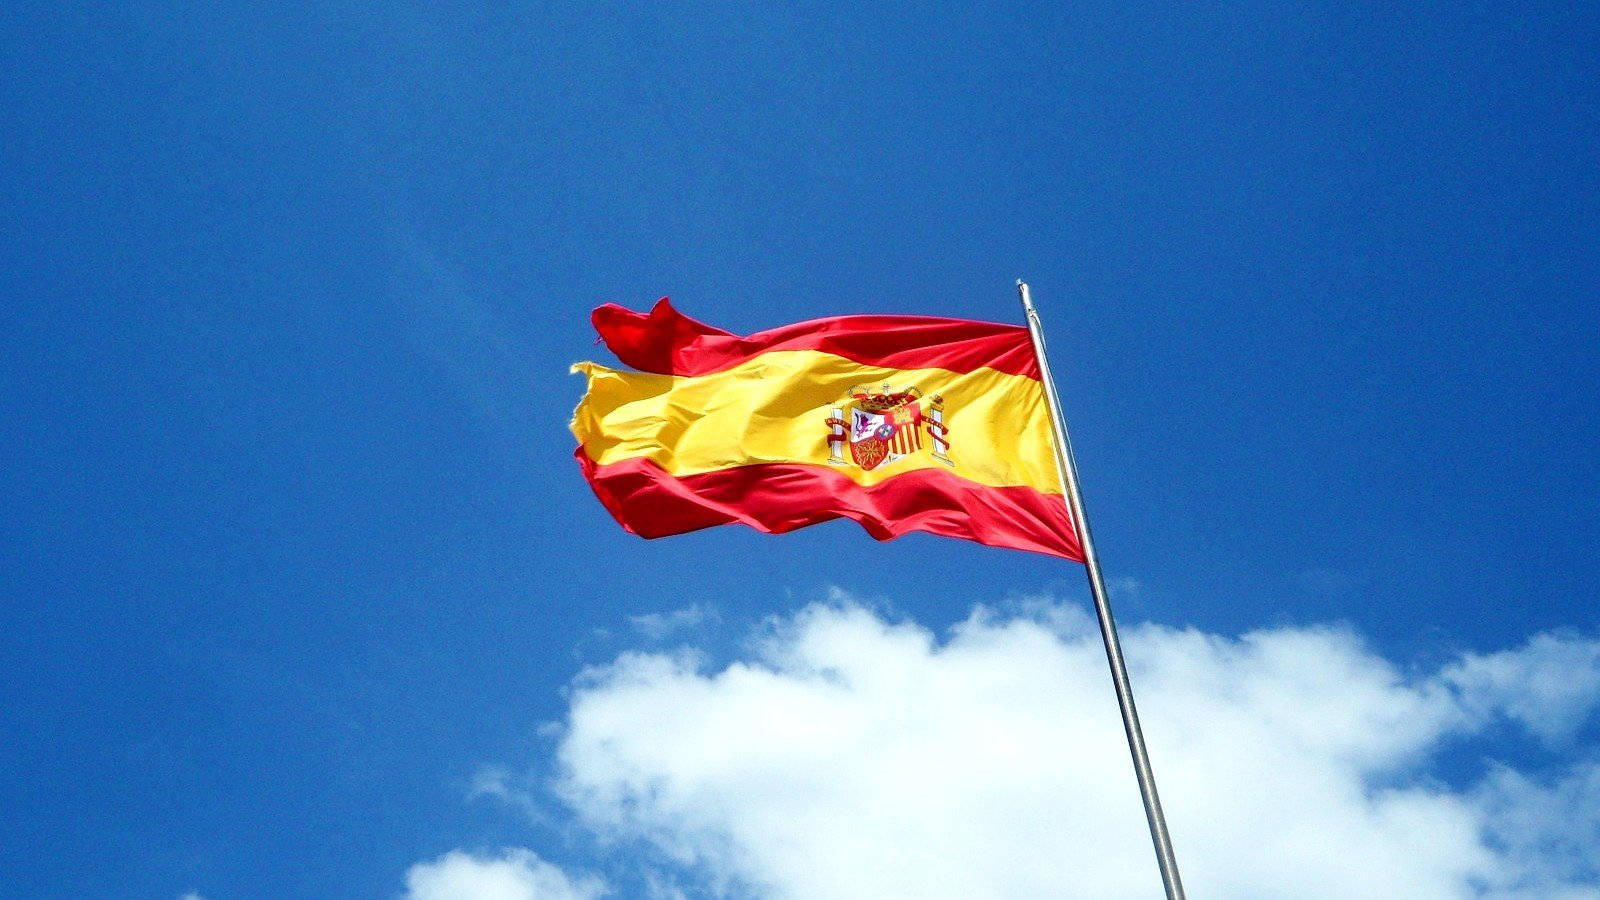 Majestic Spanish Flag In Mid-air